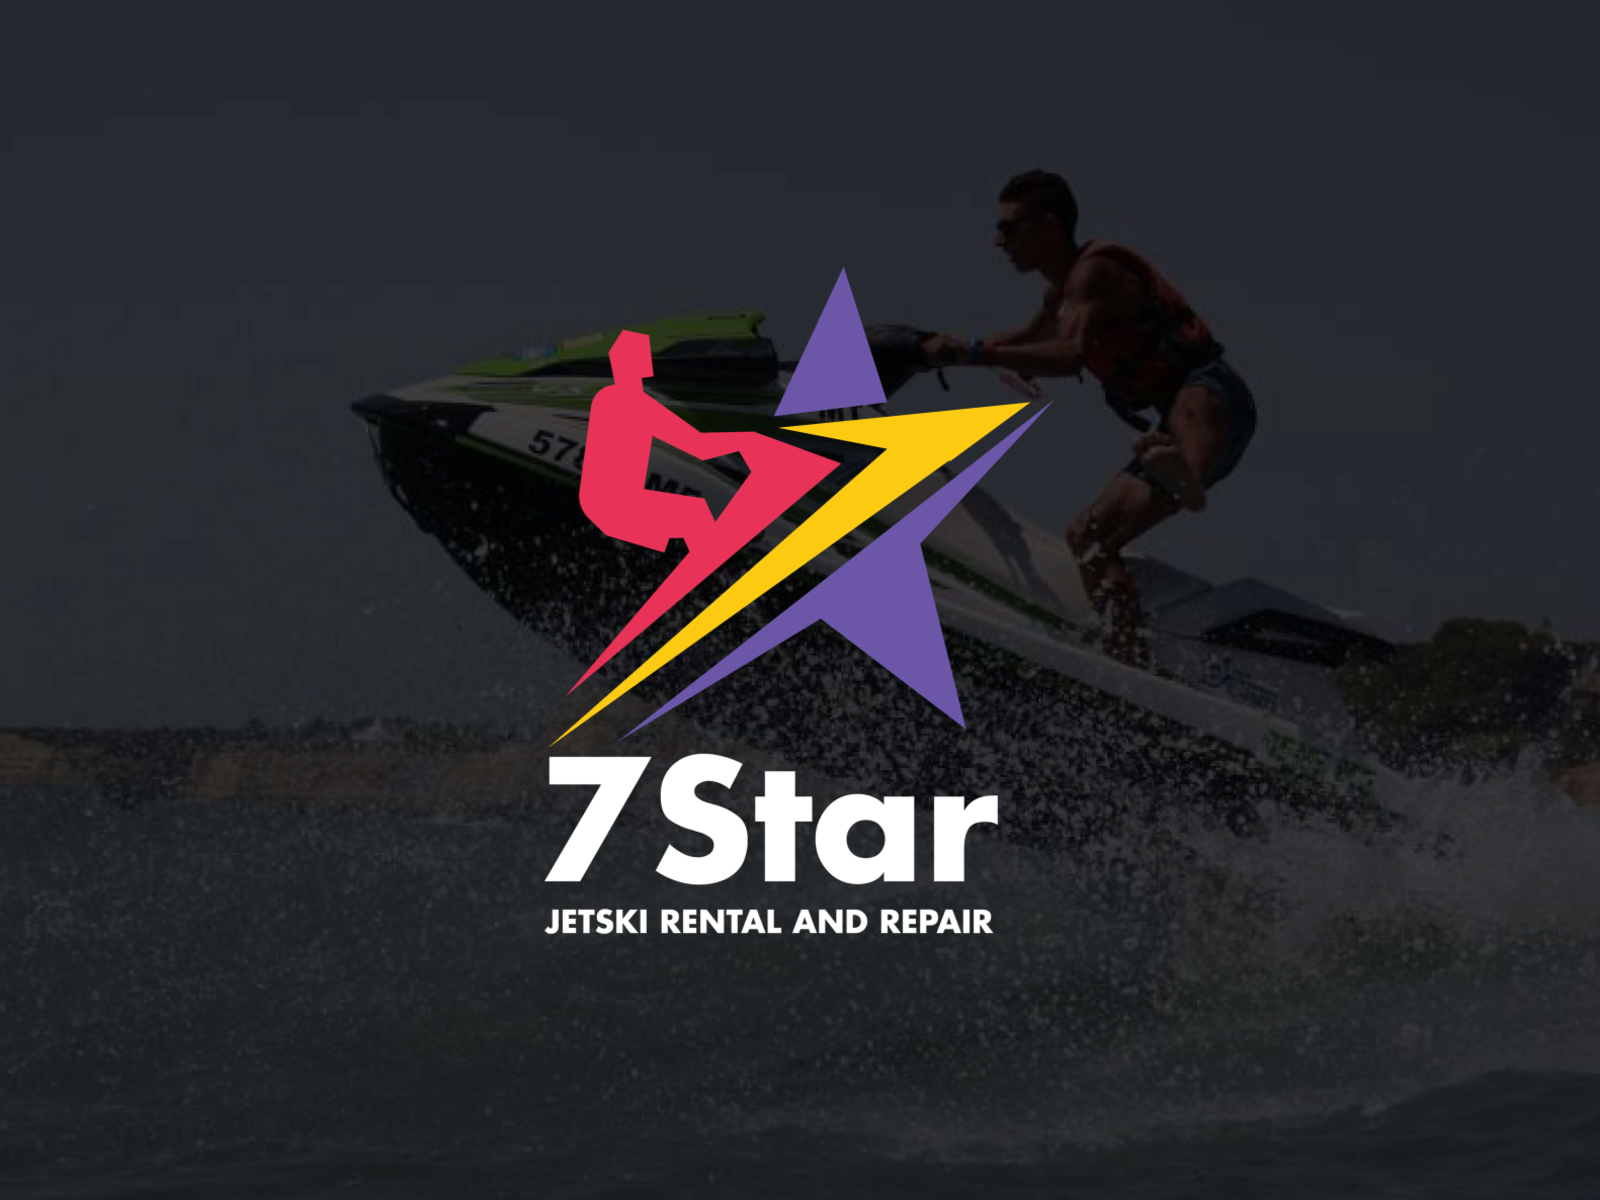 Seven Star – Group of Companies